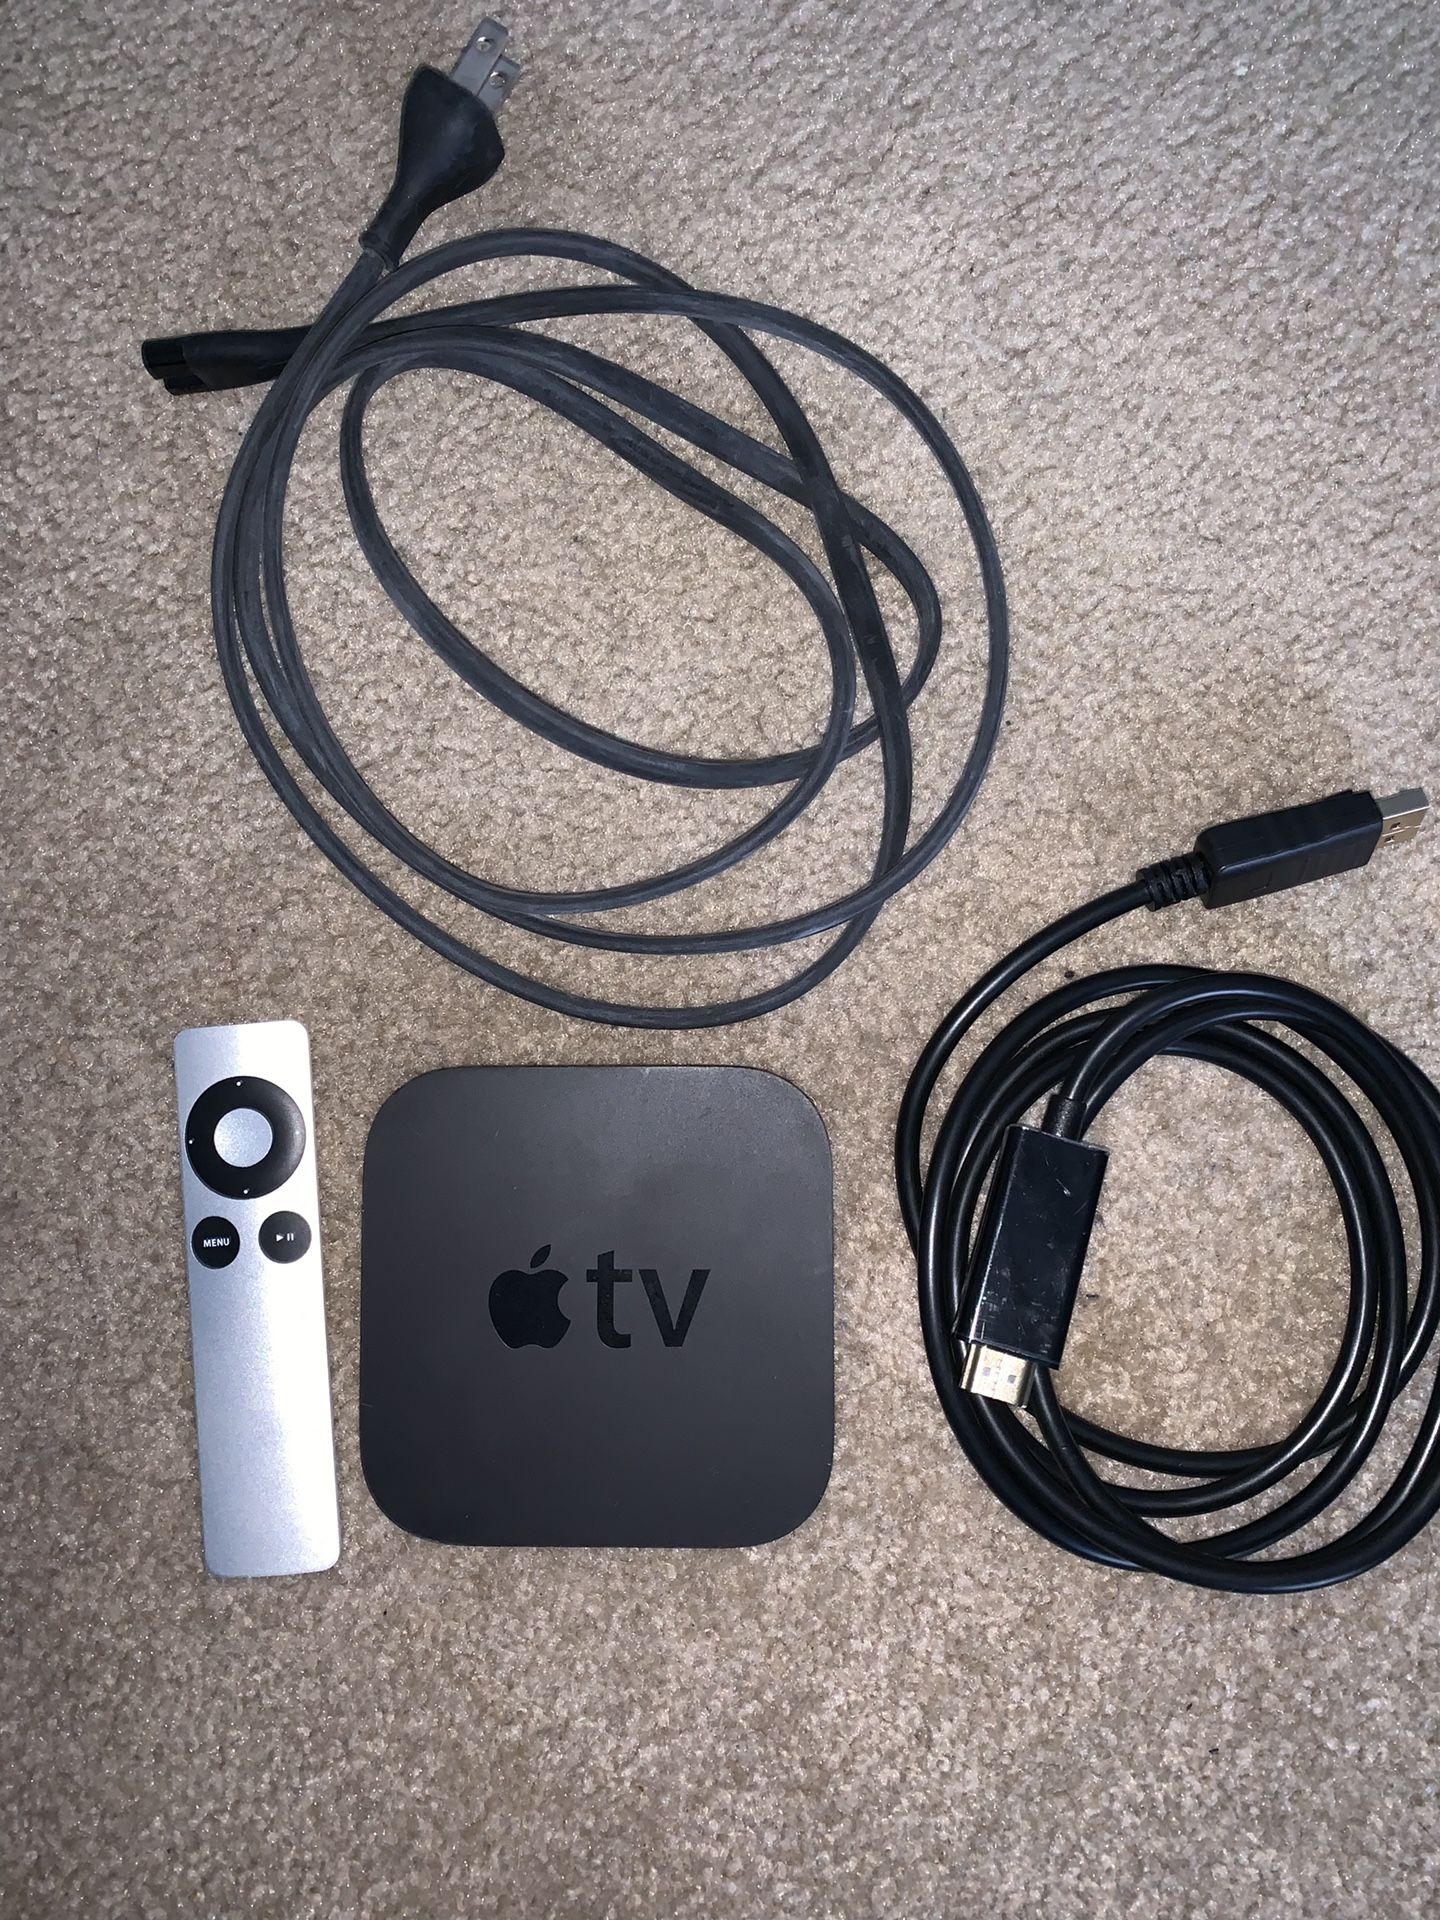 Apple TV and display port to HDMI